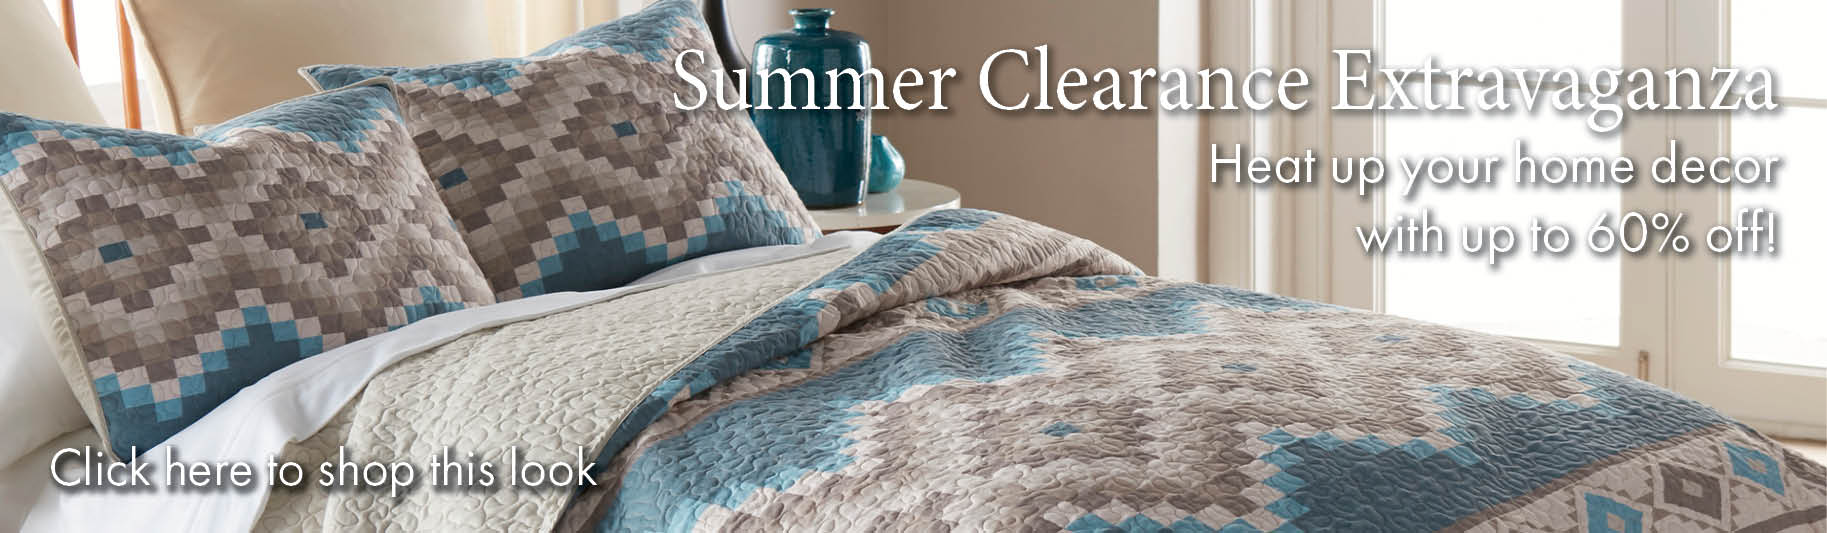 Summer Clearance Save up to 60% on Select Designs